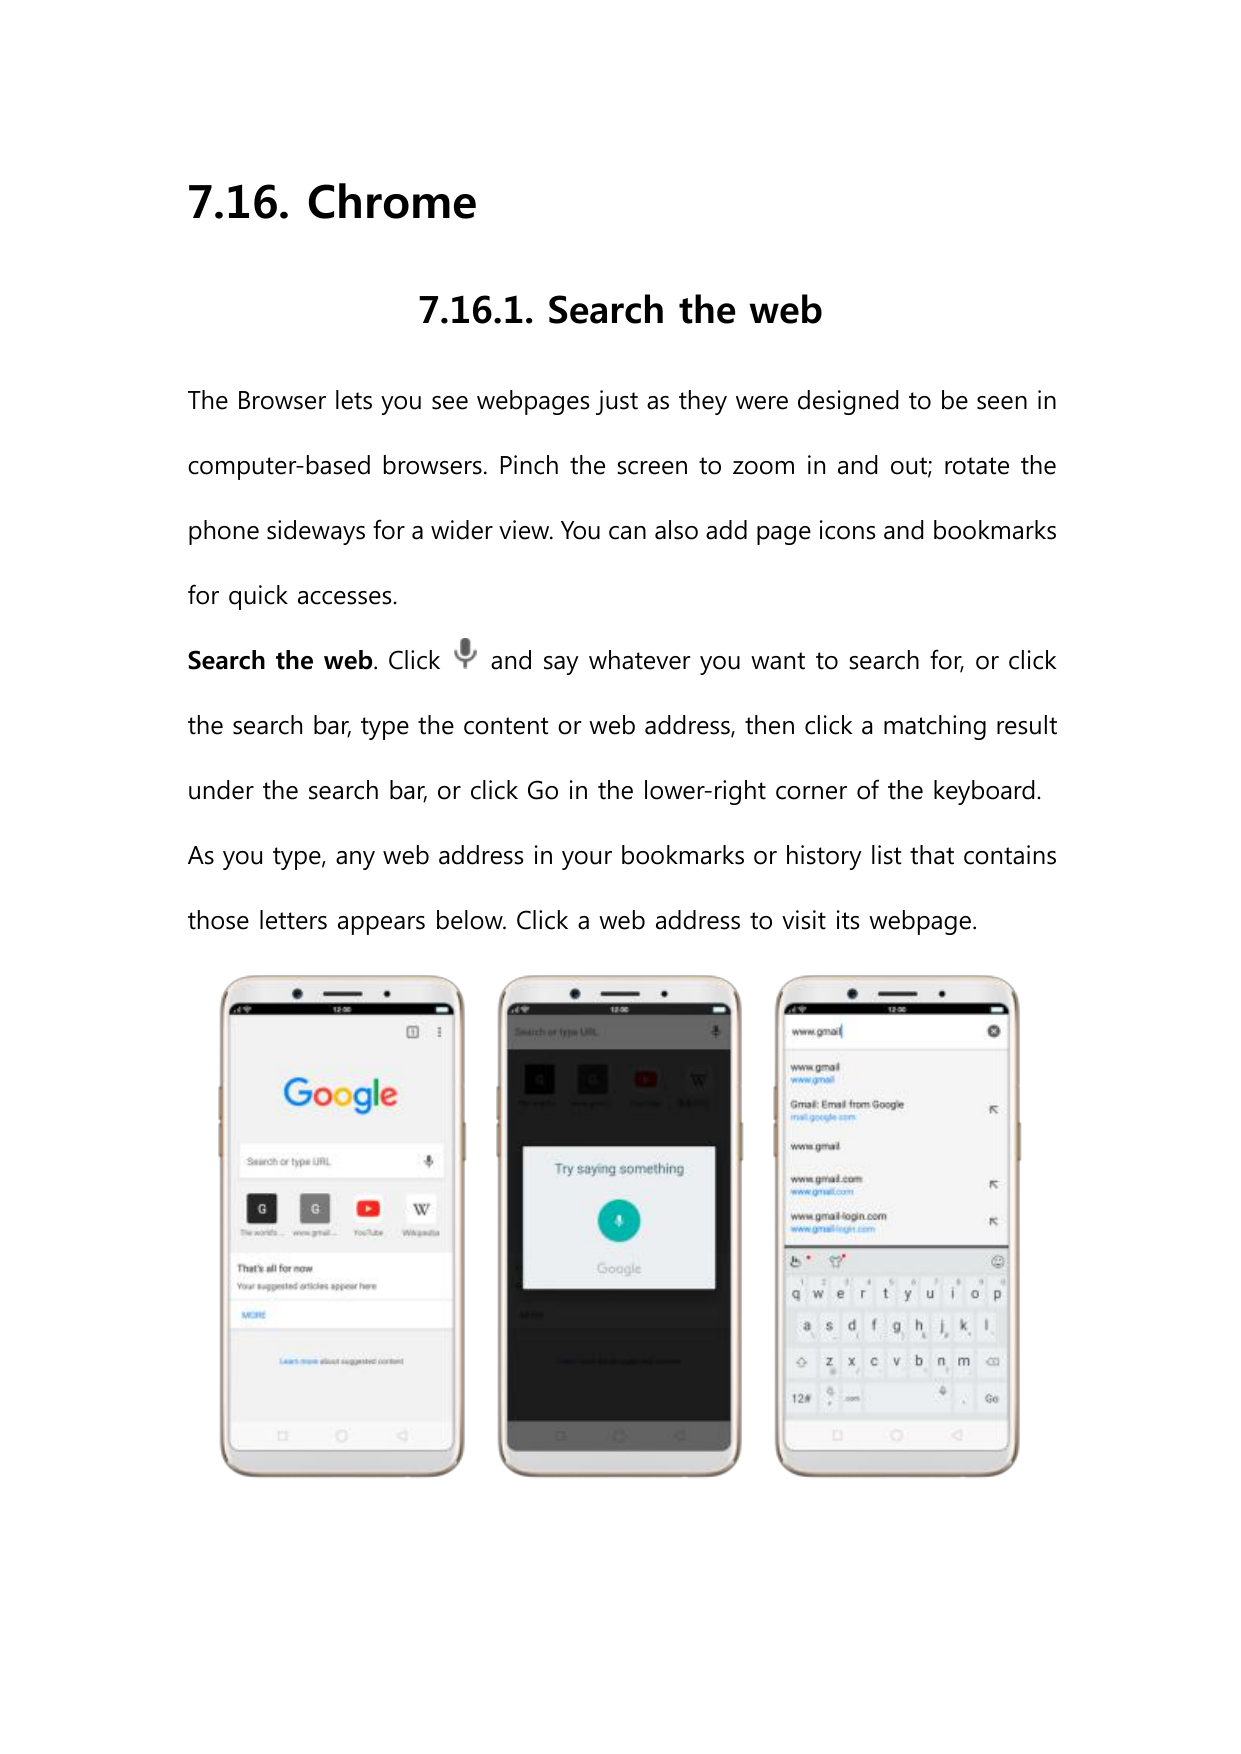 7.16. Chrome7.16.1. Search the webThe Browser lets you see webpages just as they were designed to be seen incomputer-based brows